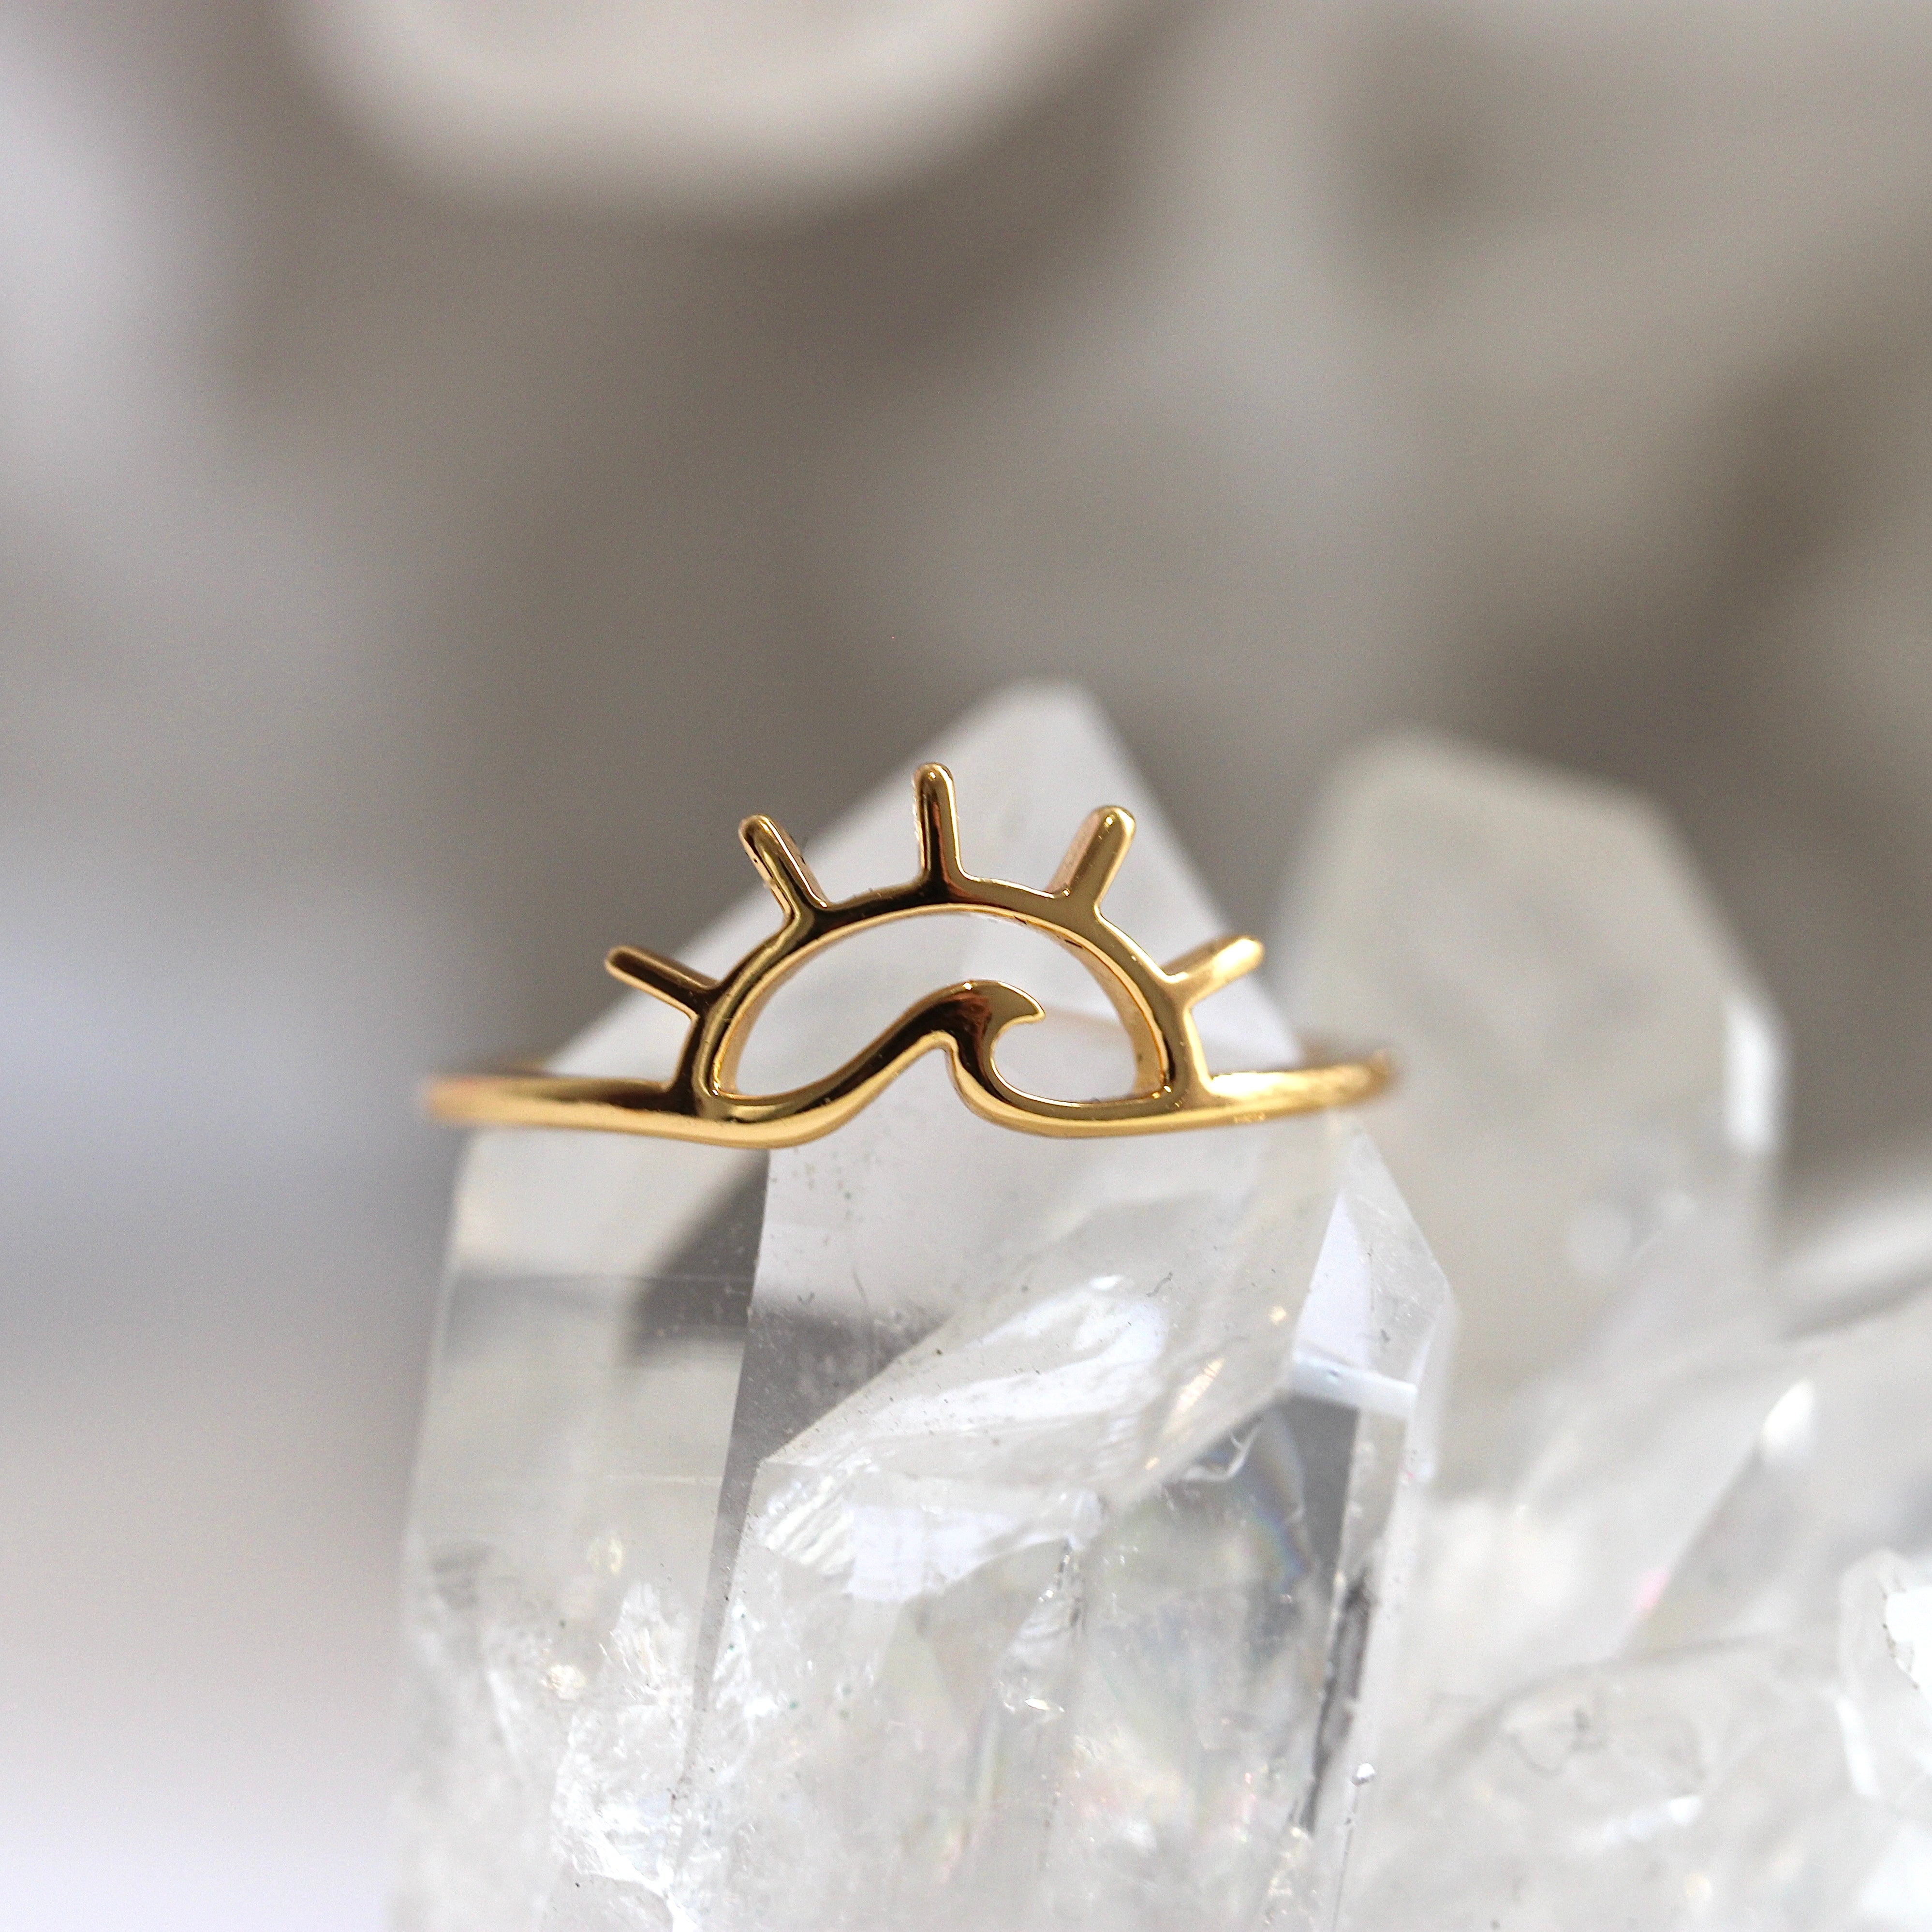 $ALE - Rise + Shine Ring - Gold Plated